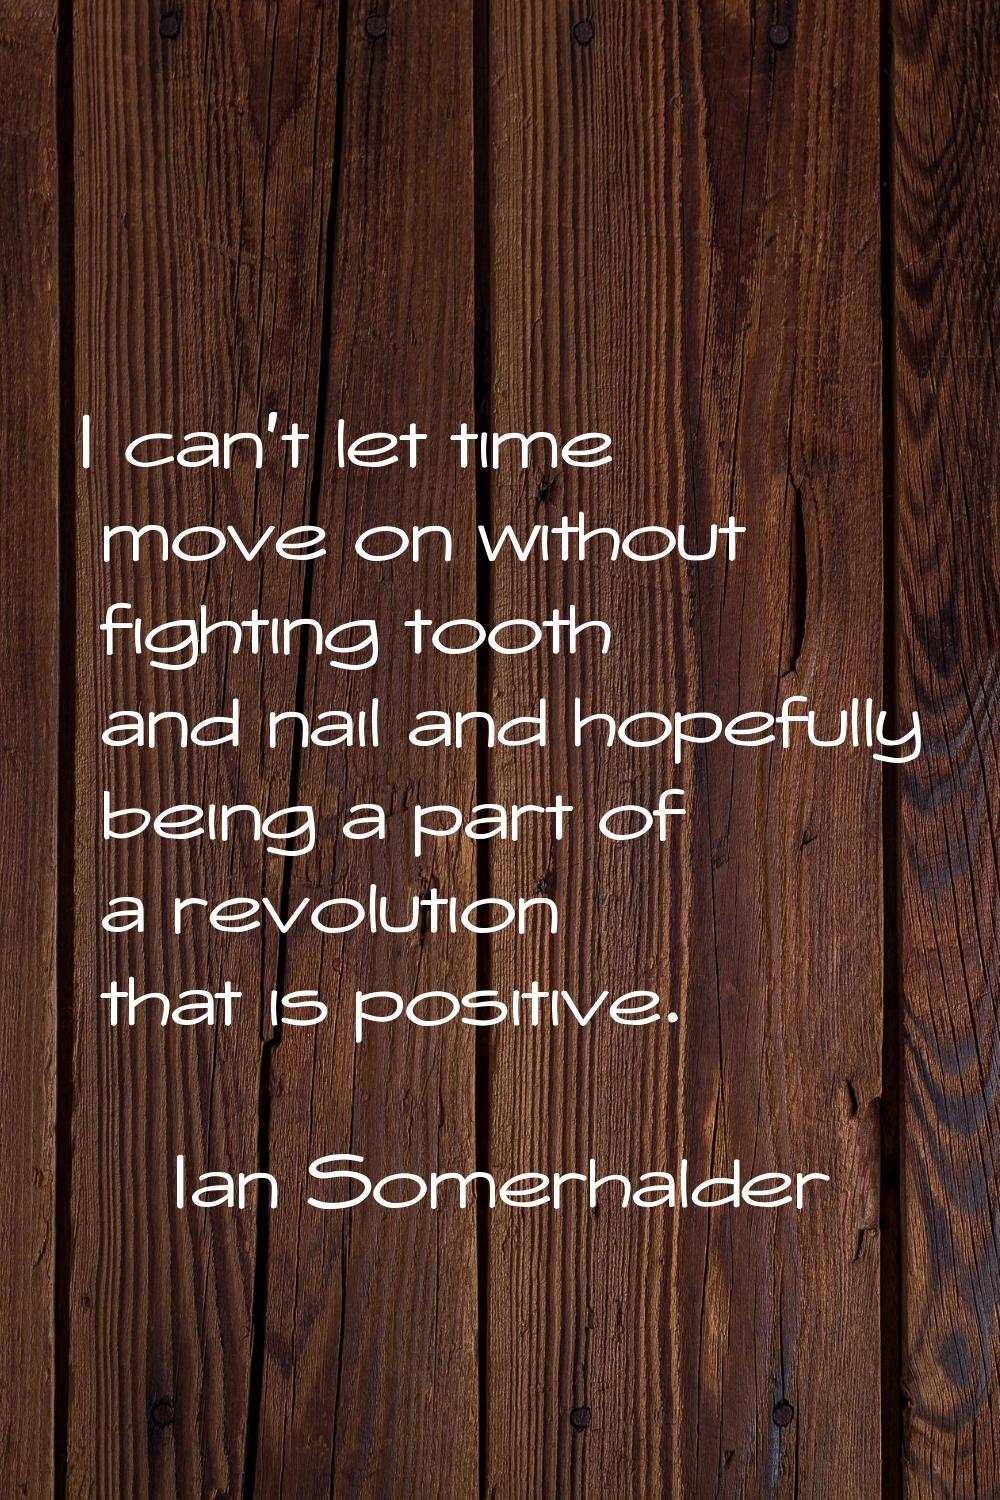 I can't let time move on without fighting tooth and nail and hopefully being a part of a revolution